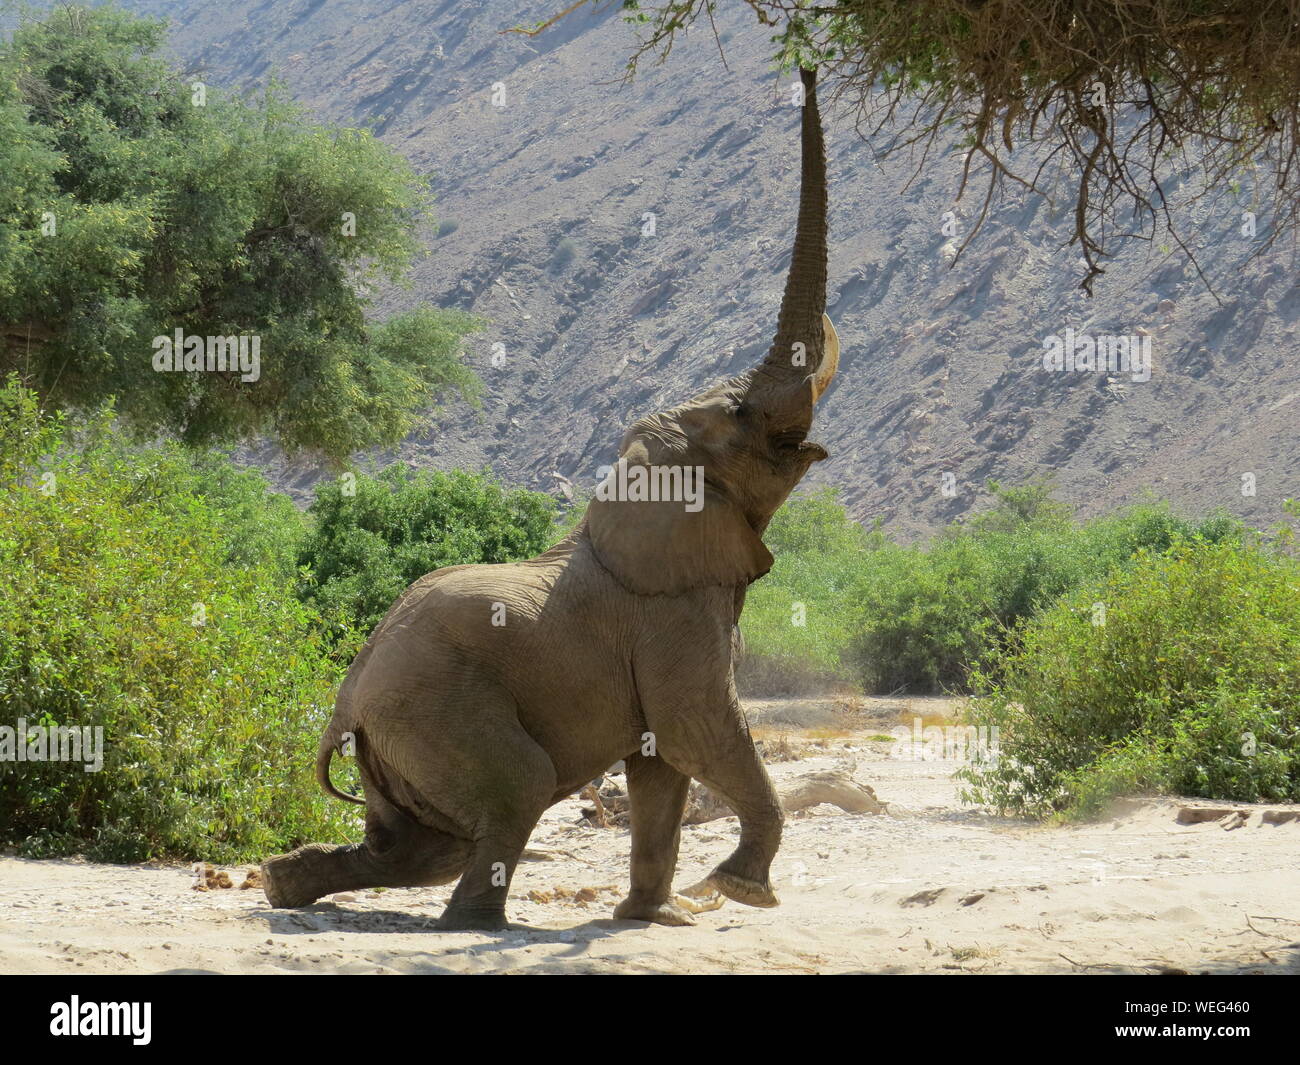 Bellowing Elephant On Sand By Plants And Mountain Stock Photo